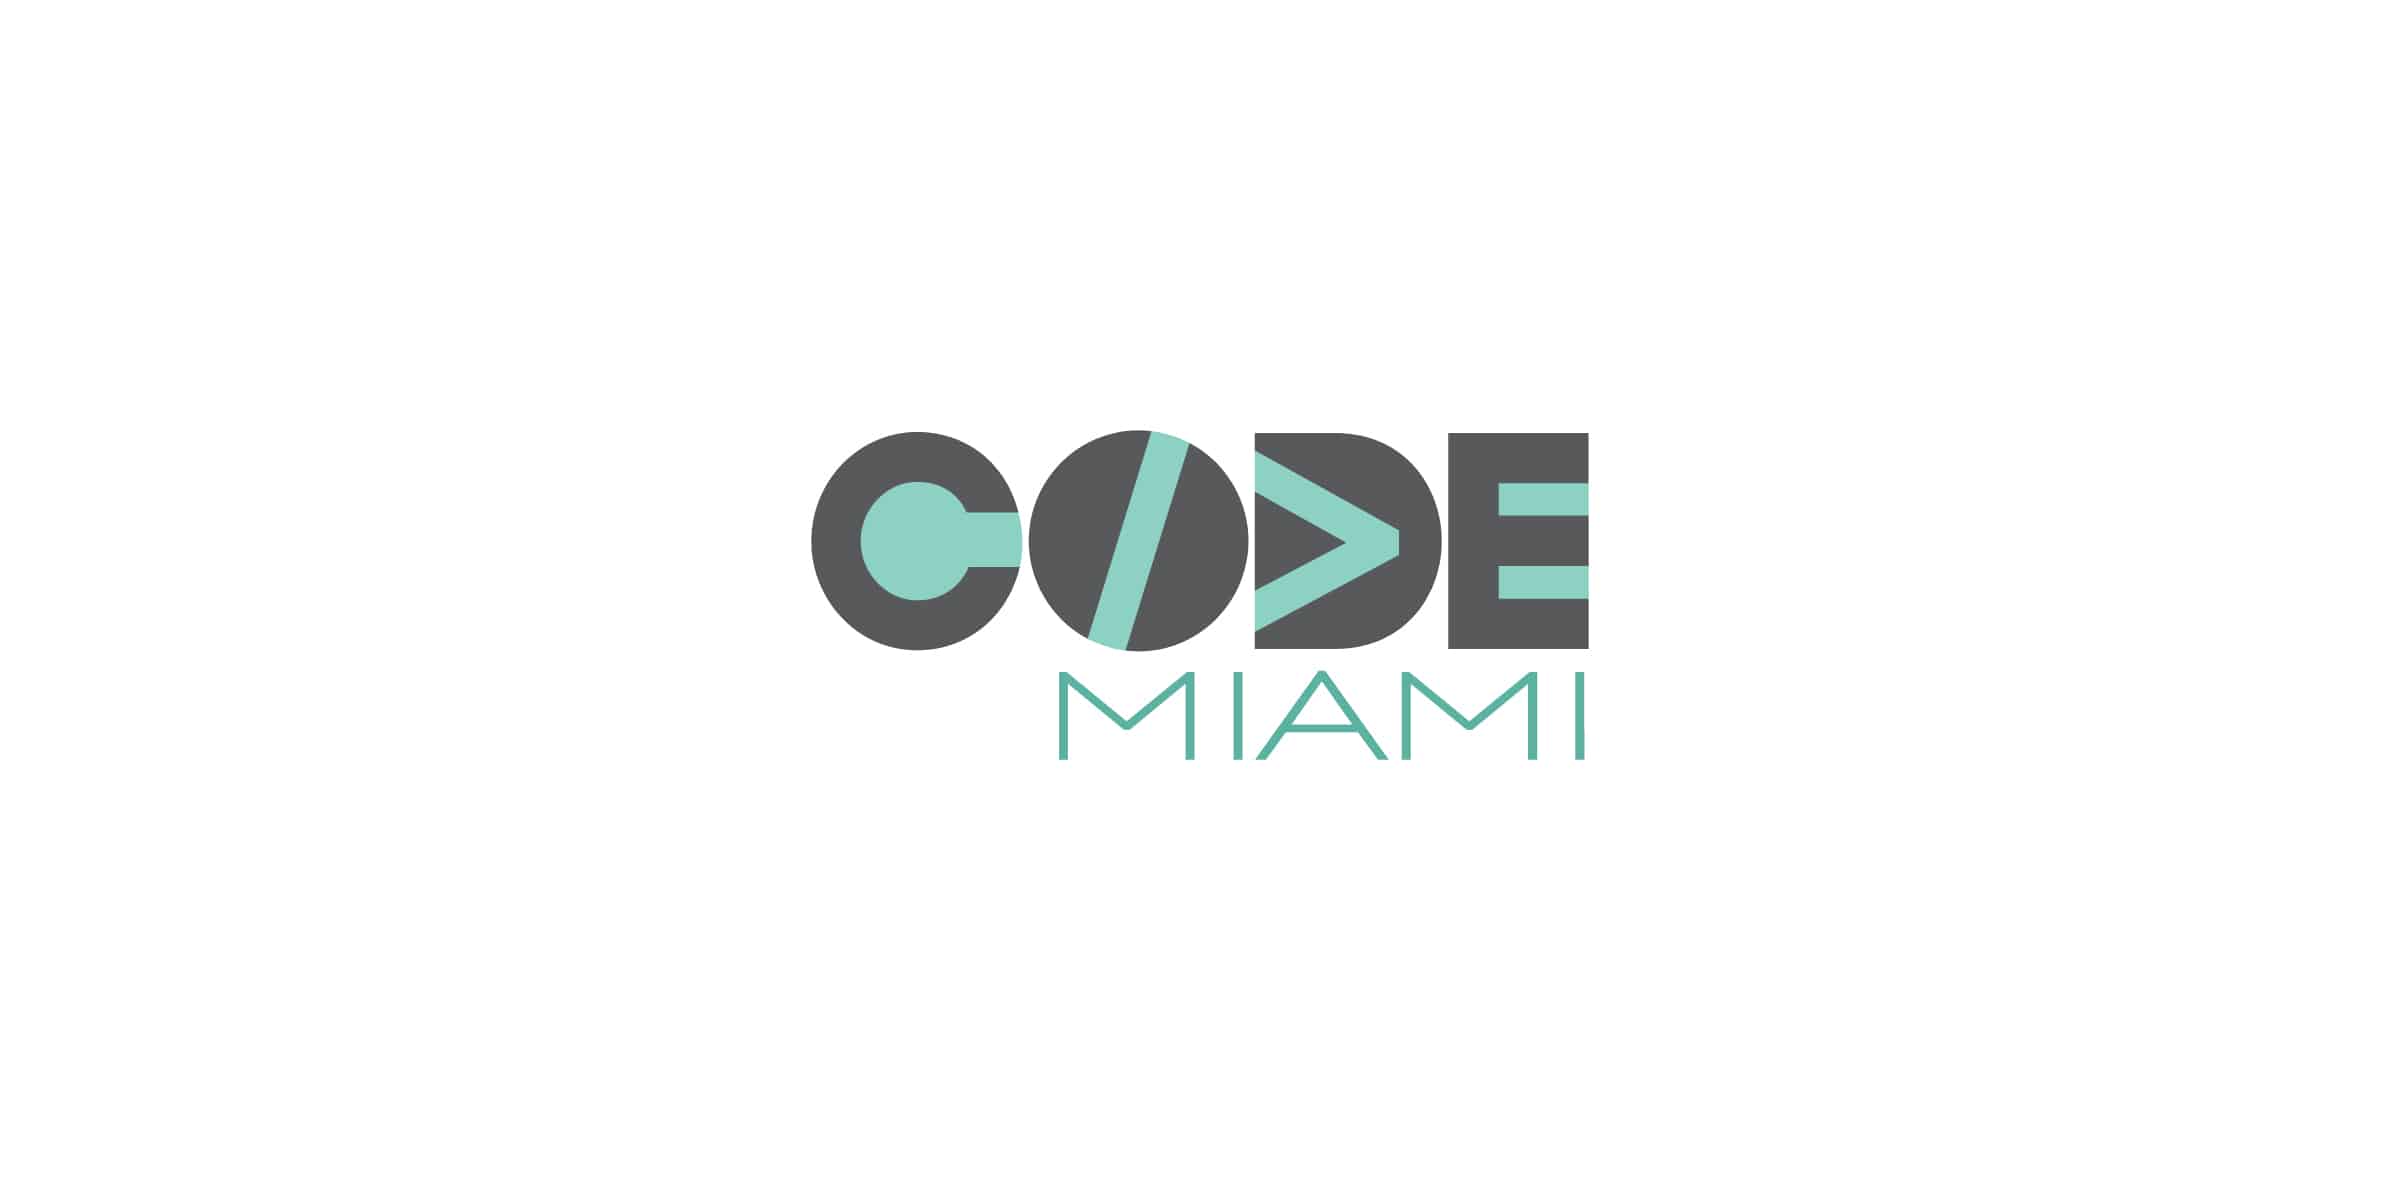 Code Miami Logo Design using inspiration from computer code with mint green and grey color palette.